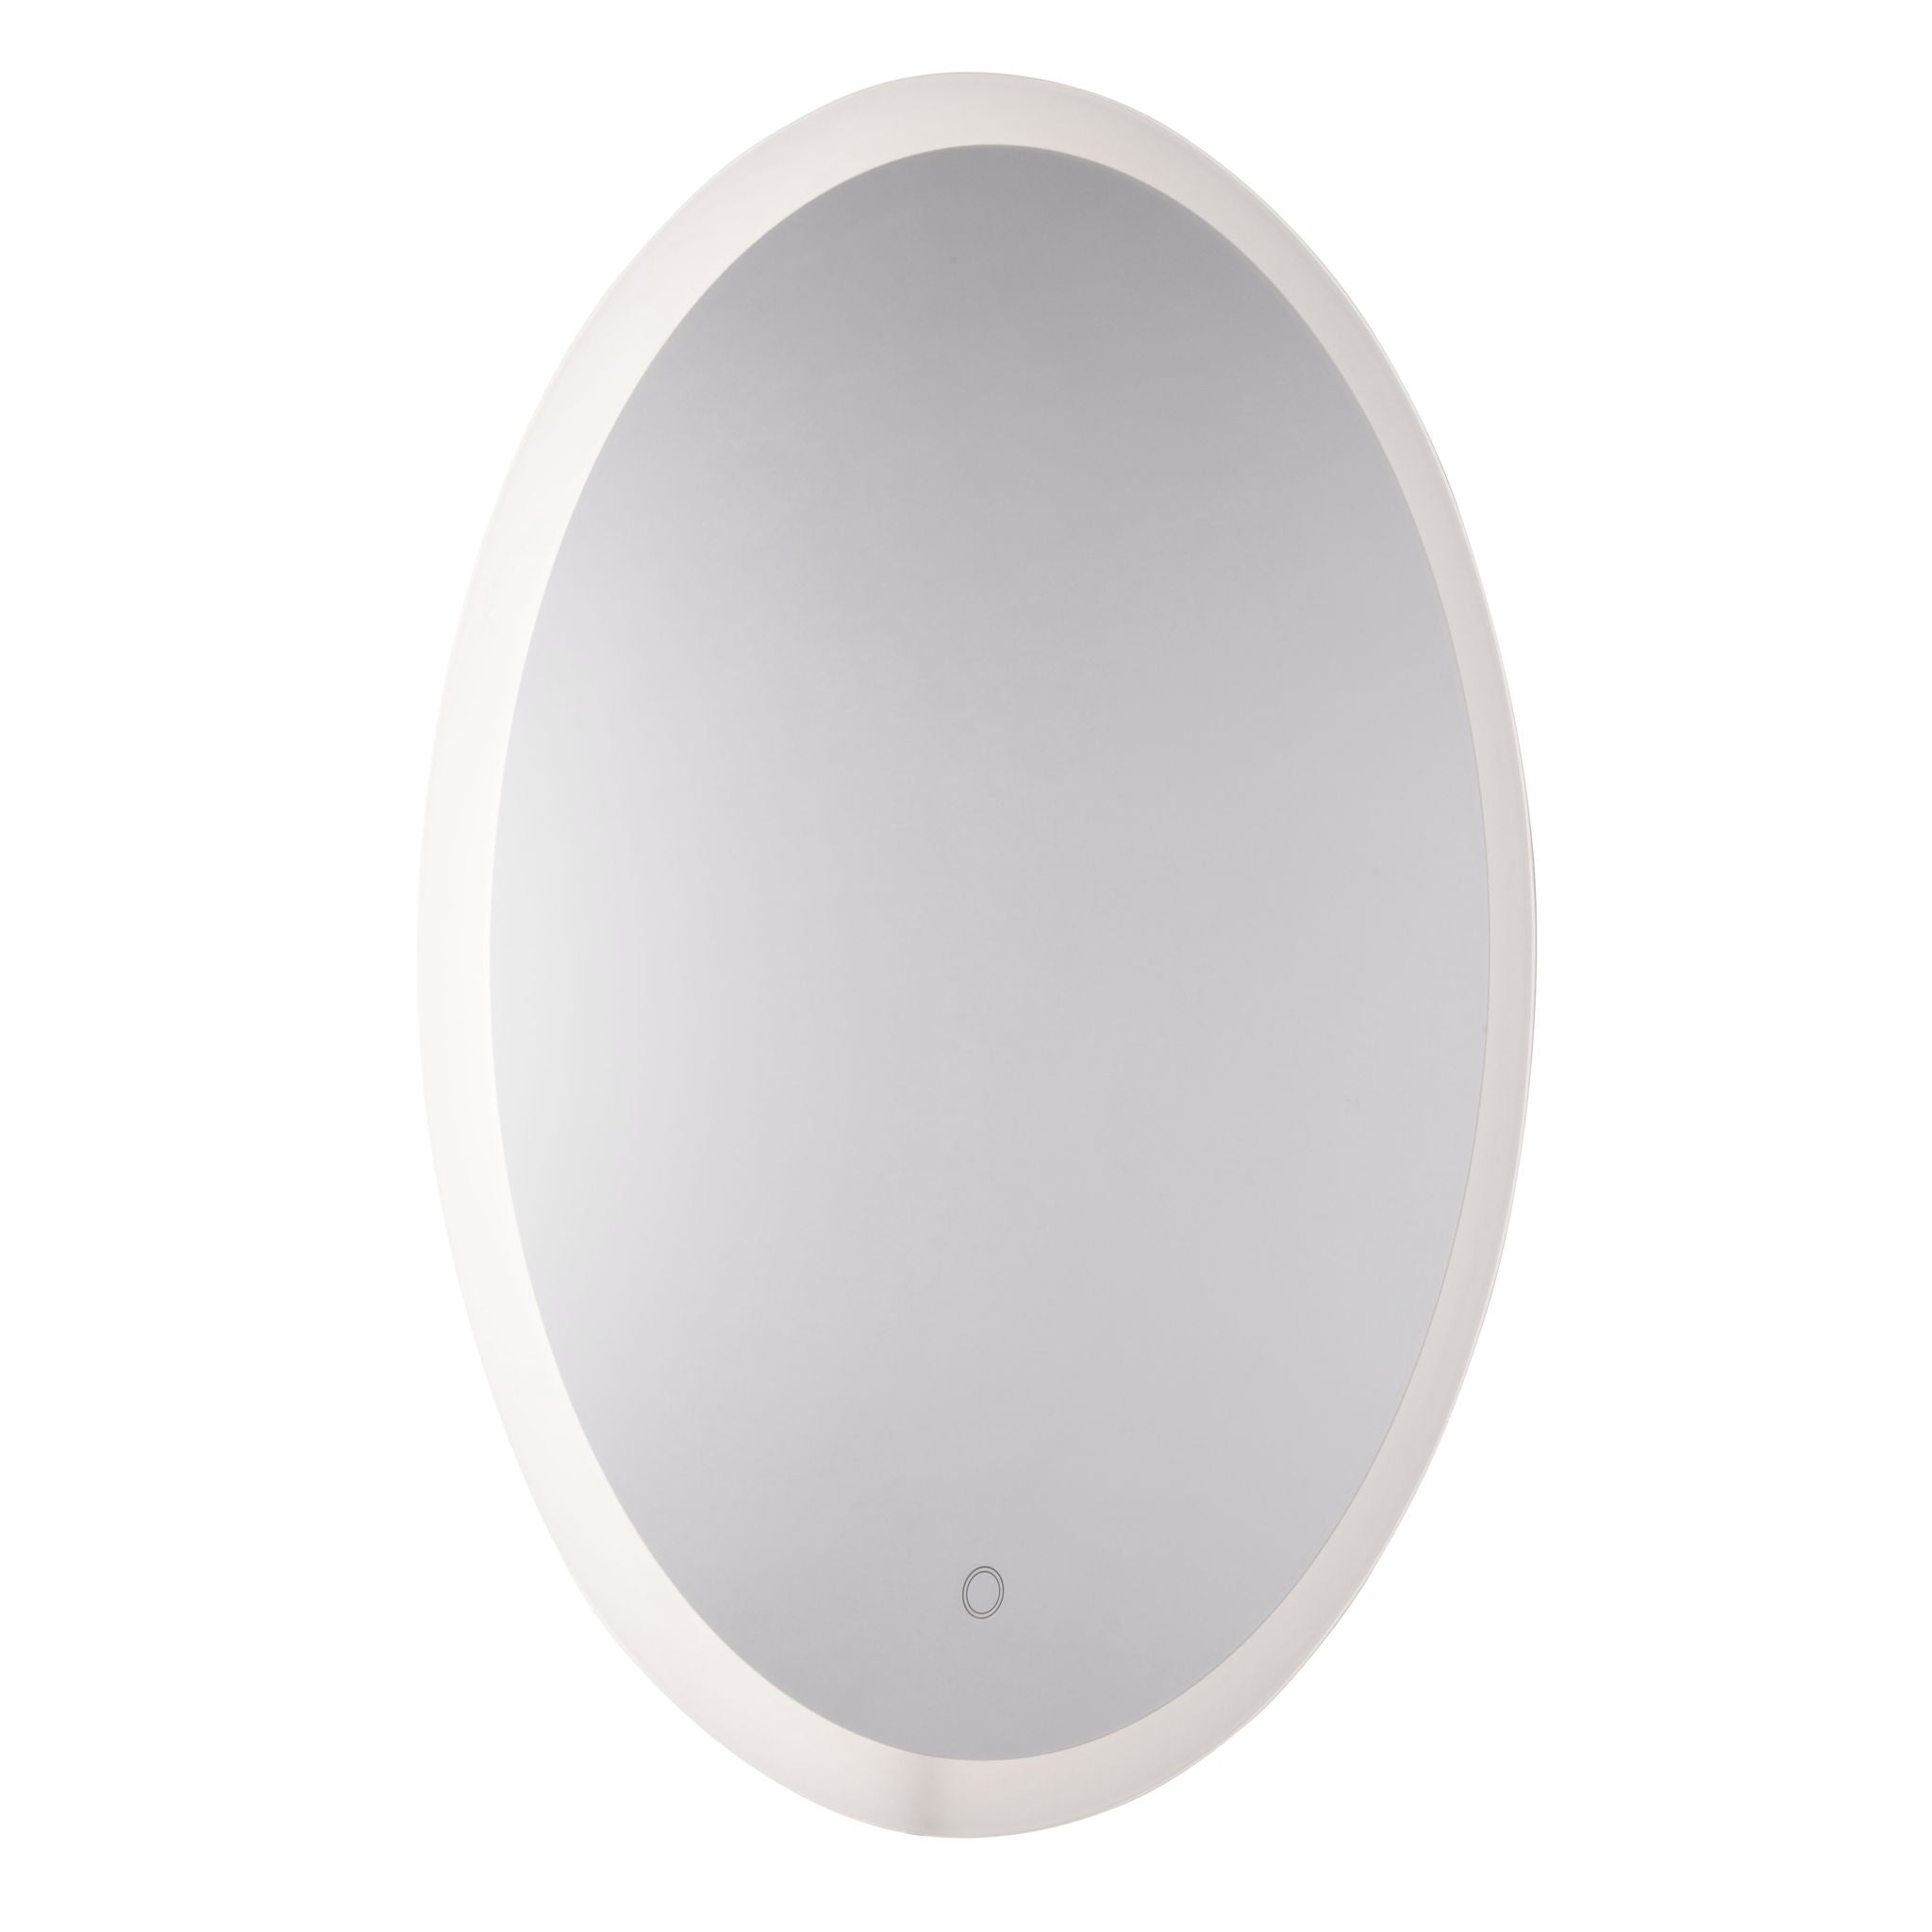 Reflections Mirror INTEGRATED LED - AM318 | ARTCRAFT